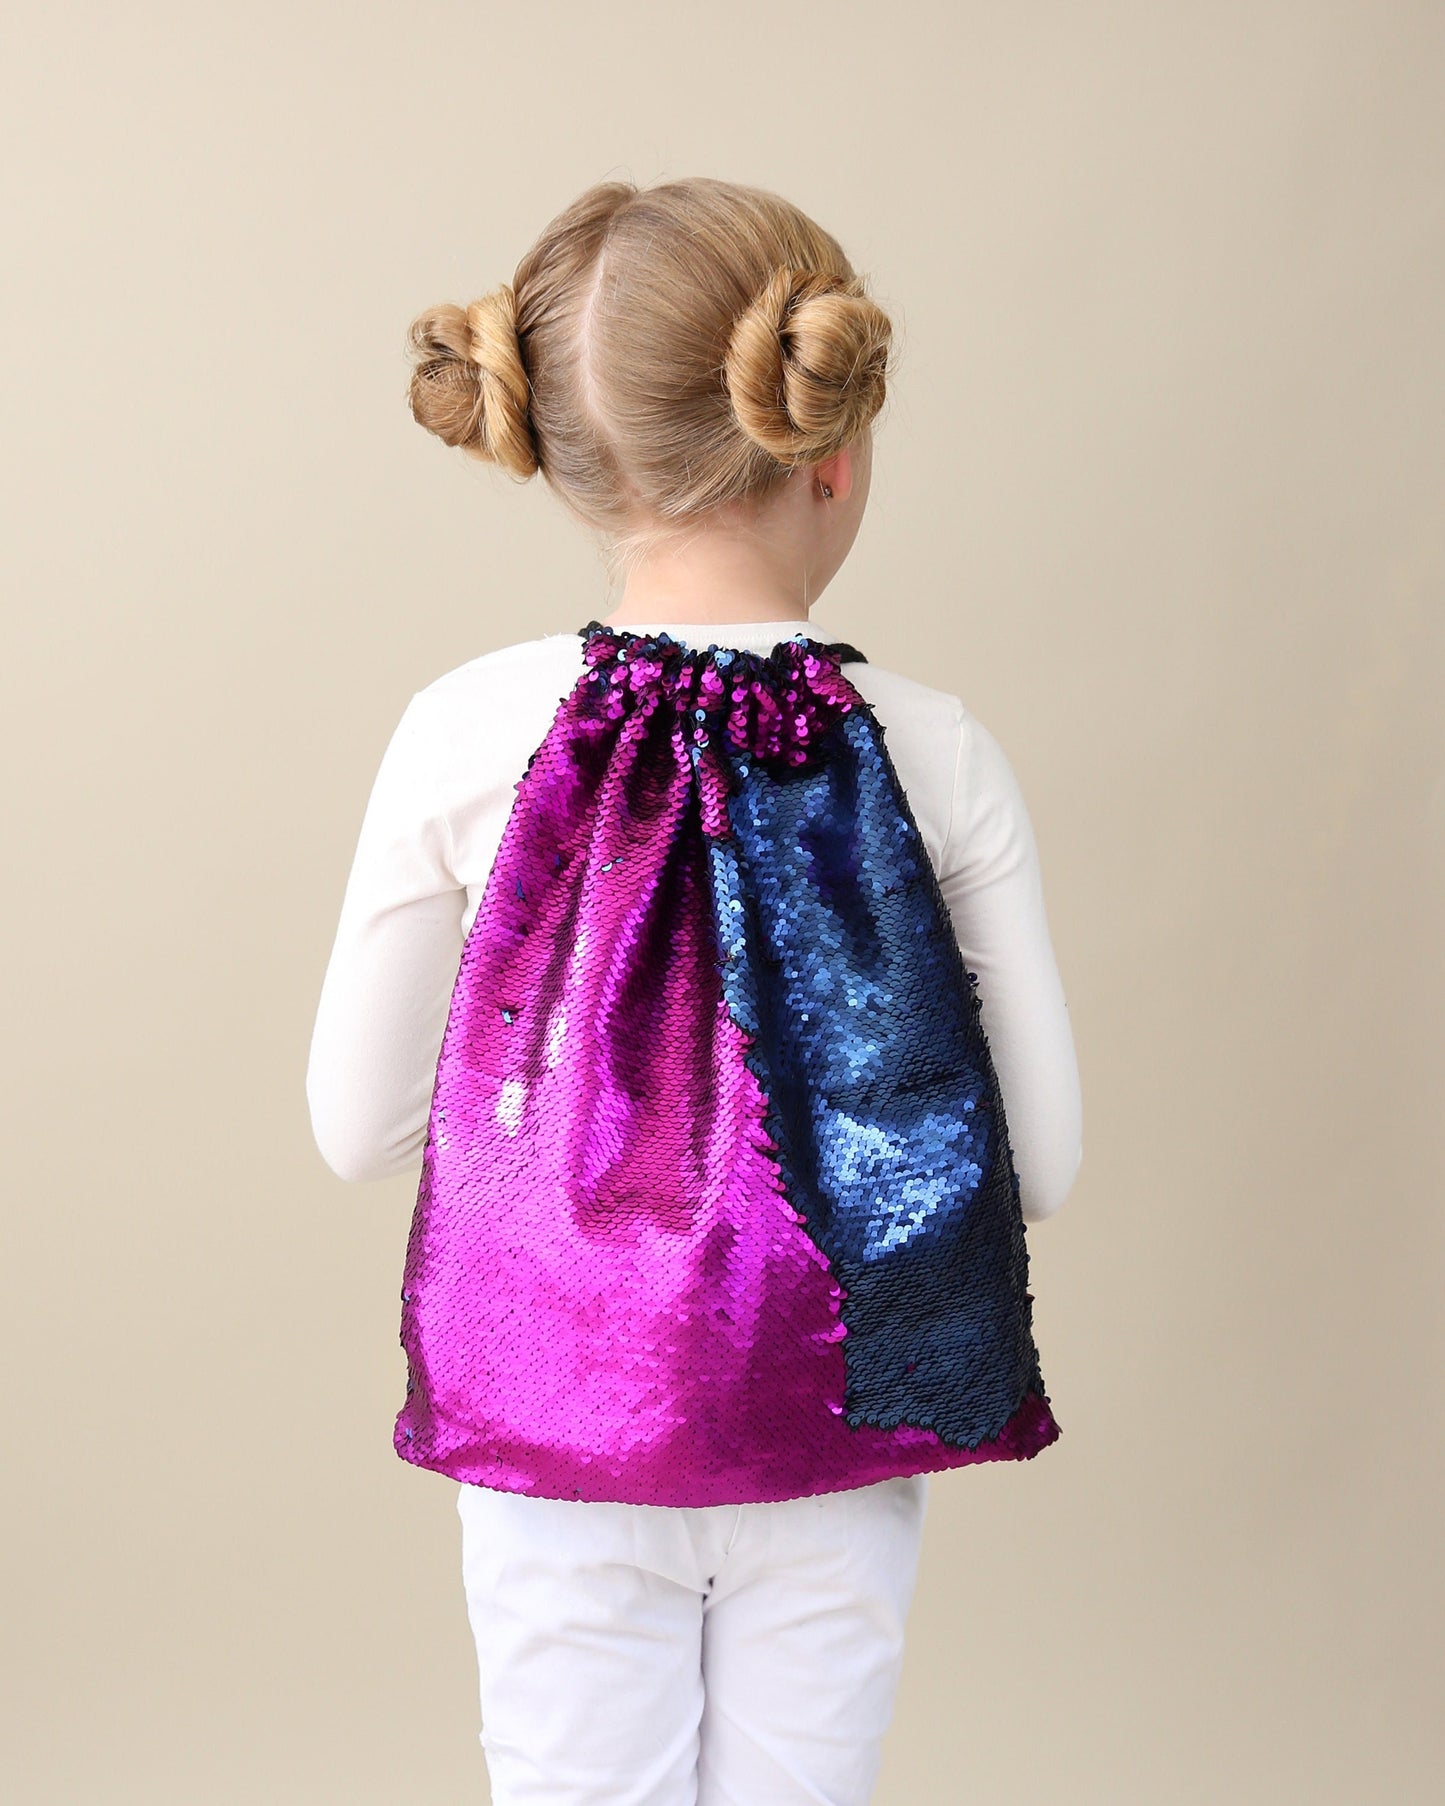 Navy and Hot Pink Sequin Backpack - Sequin Backpack - Sequin Bag - Reversible Sequin Backpack - Drawstring Flip Sequin Backpack - Sequin Bag